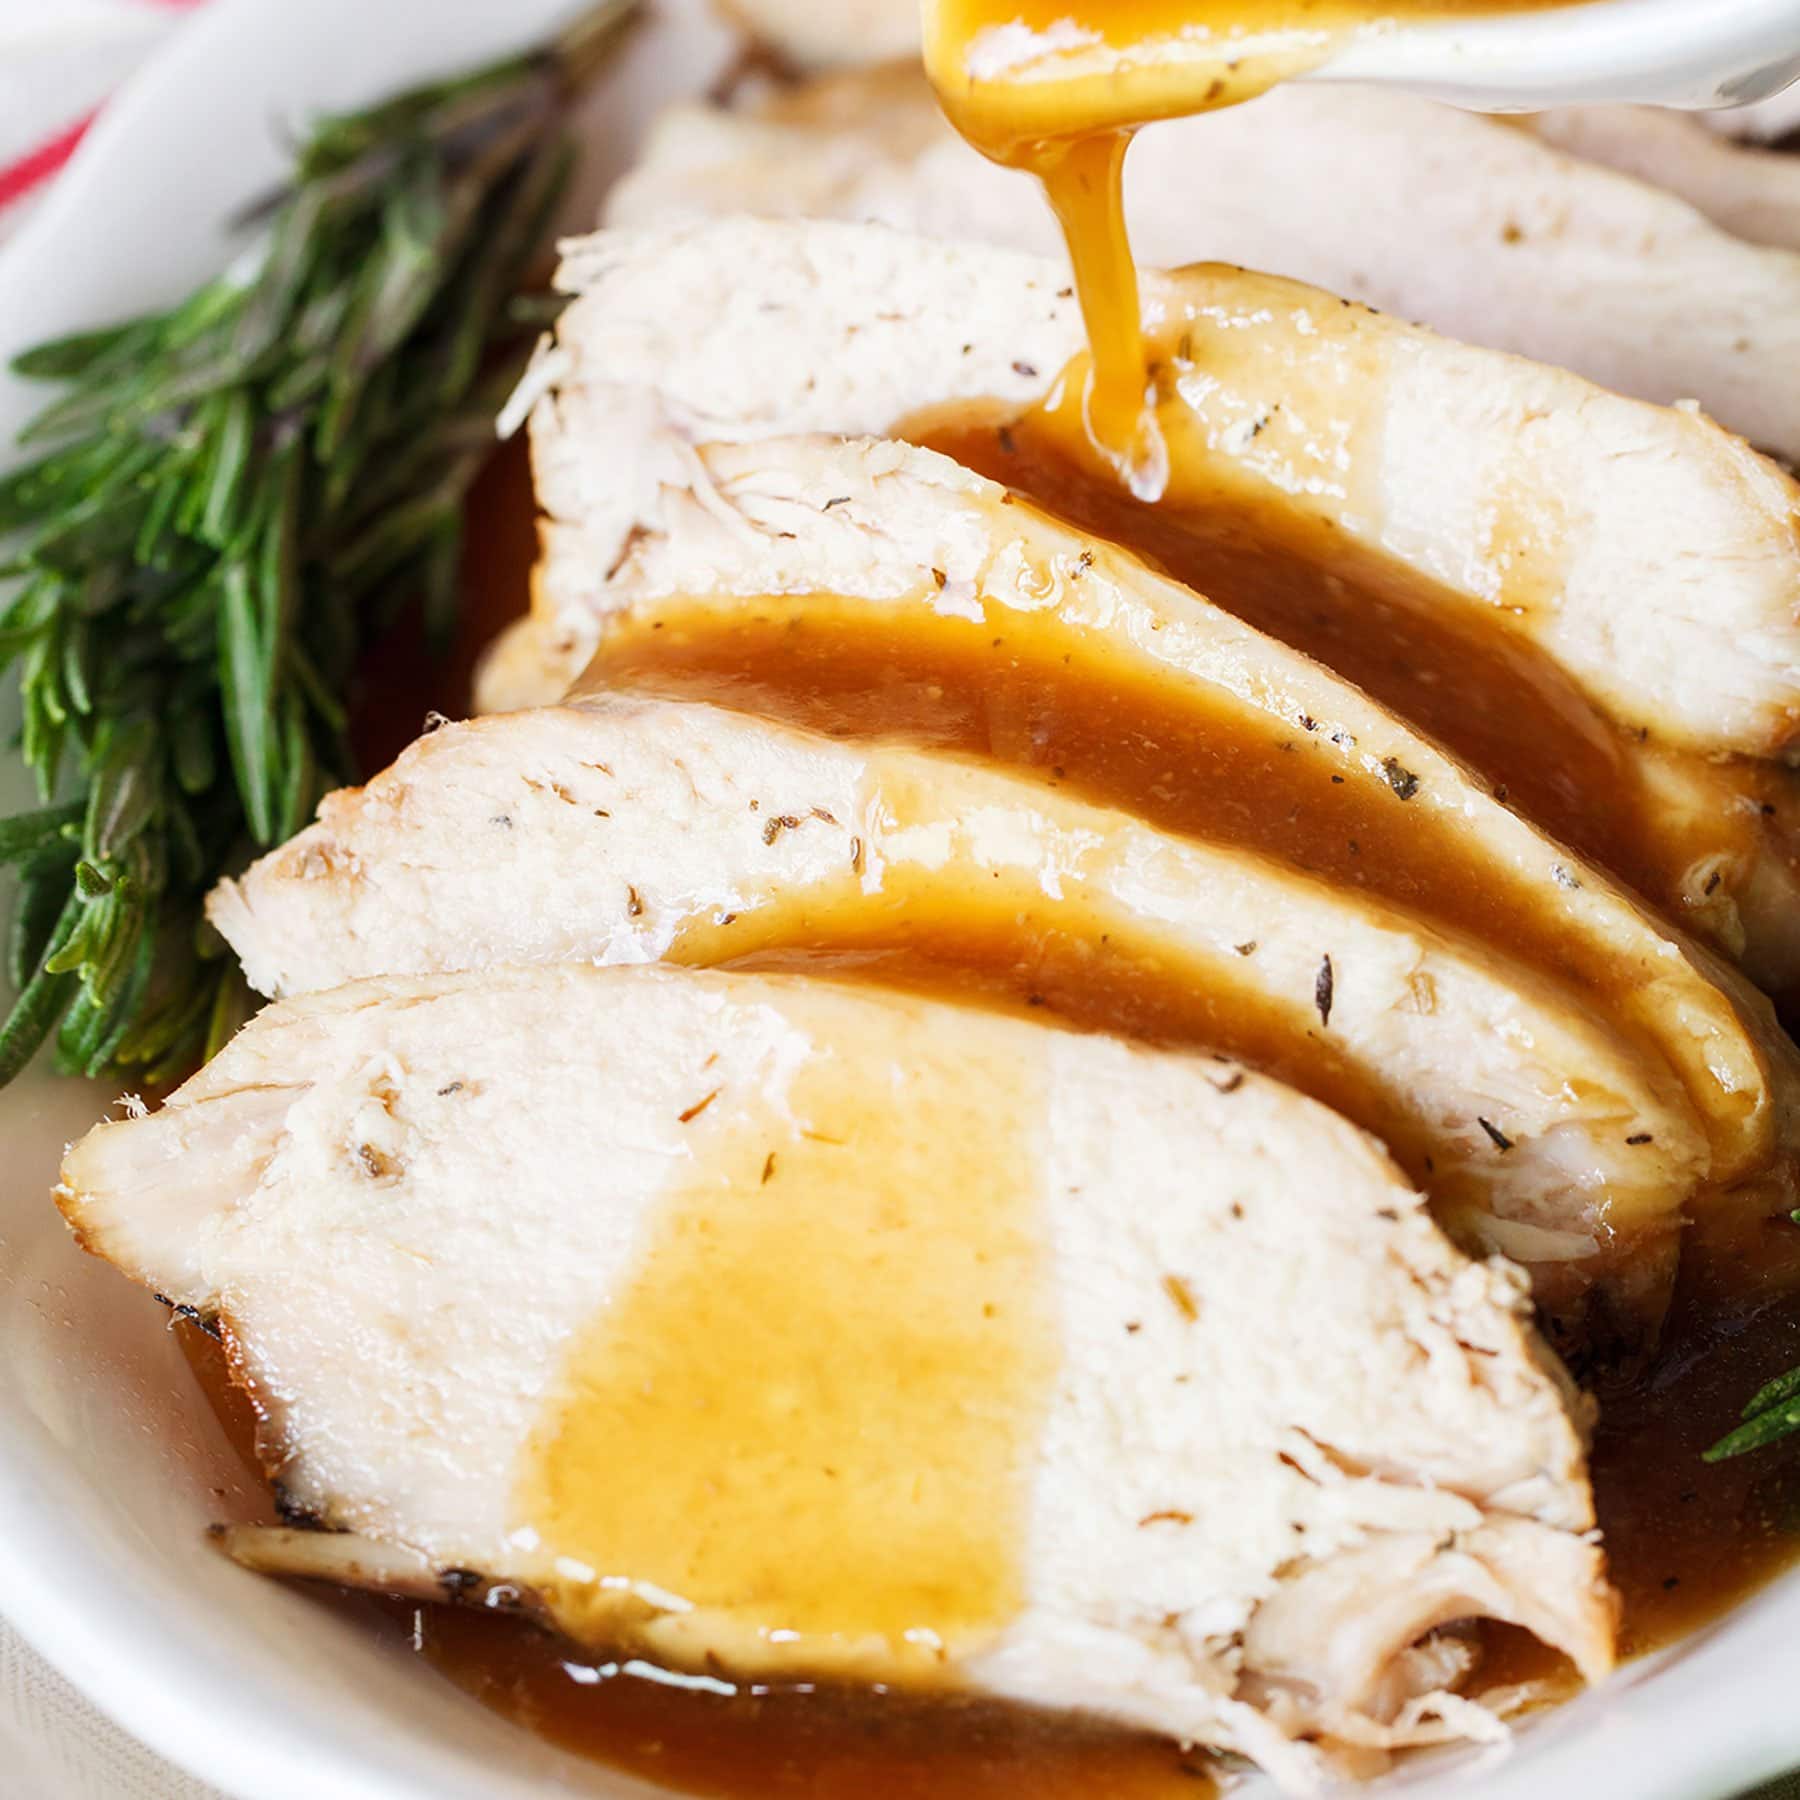 Slow Cooker Turkey Breast with easy gravy requires just 10 minutes prep time and doesn't take up valuable space in your oven on Thanksgiving! Plus it's extra tender and moist, it's a win-win!!